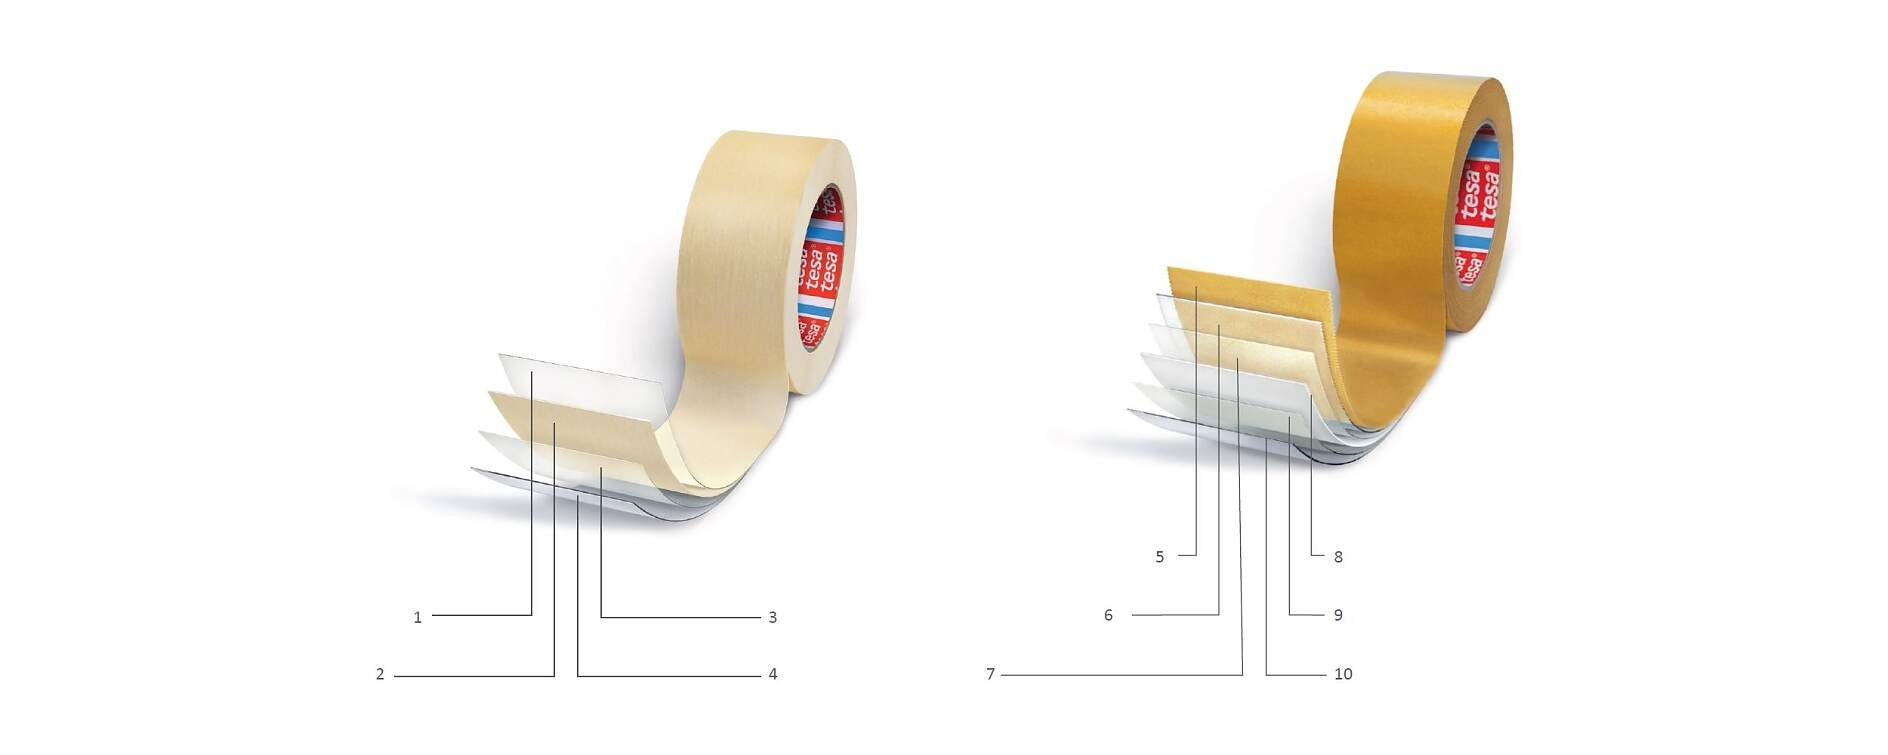 Adhesive Tape for Fabric - For Restoring Card Tables · Baize and Wool